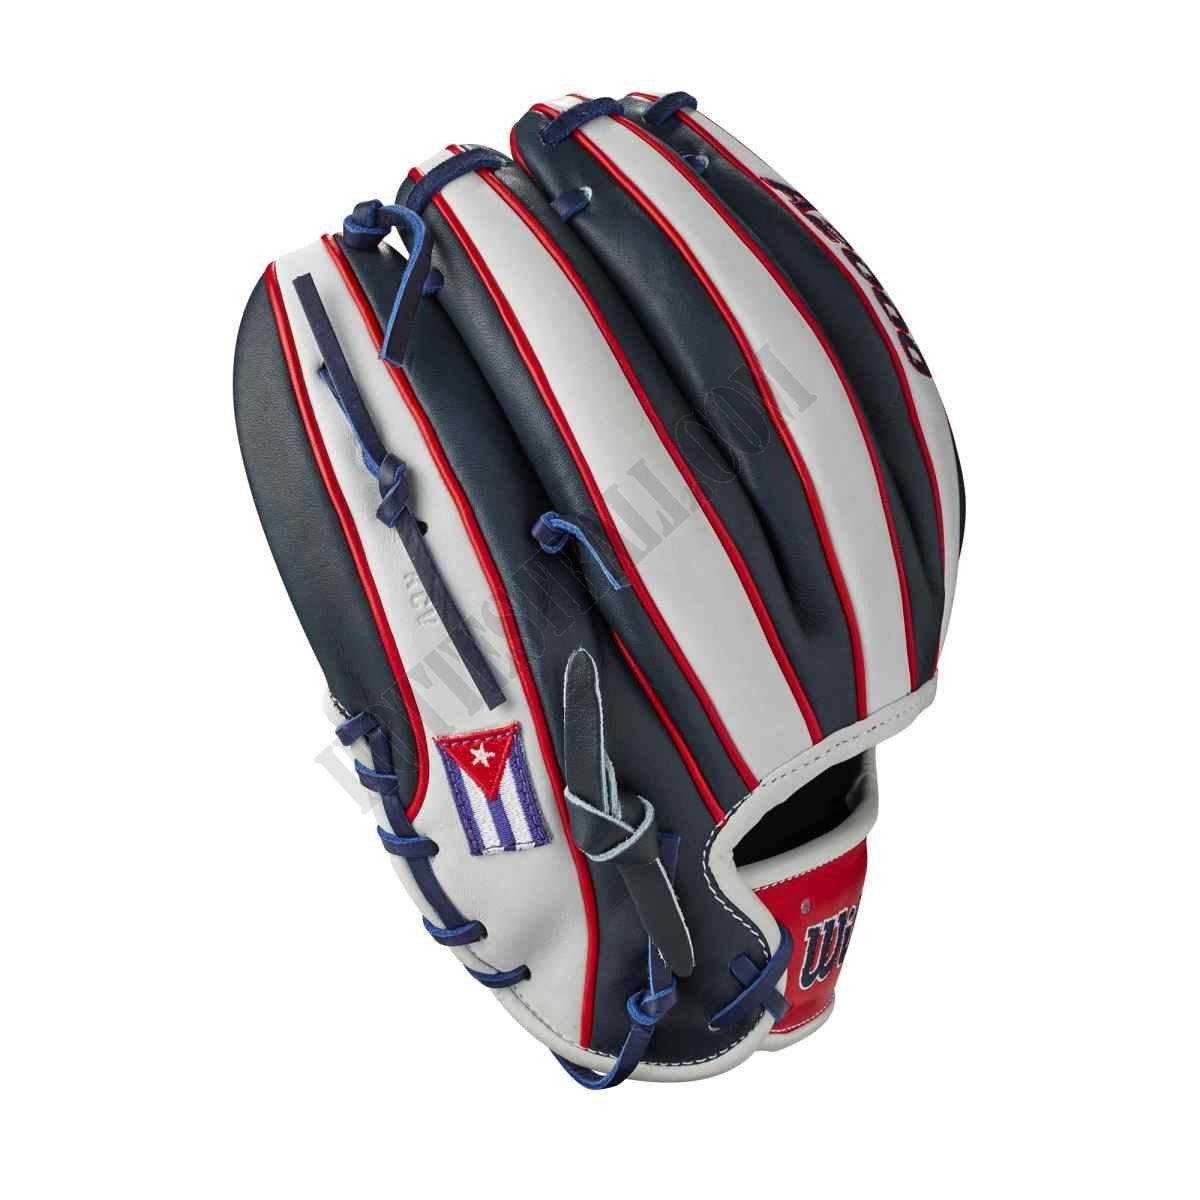 2021 A2000 1786 Cuba 11.5" Infield Baseball Glove - Limited Edition ● Wilson Promotions - -4